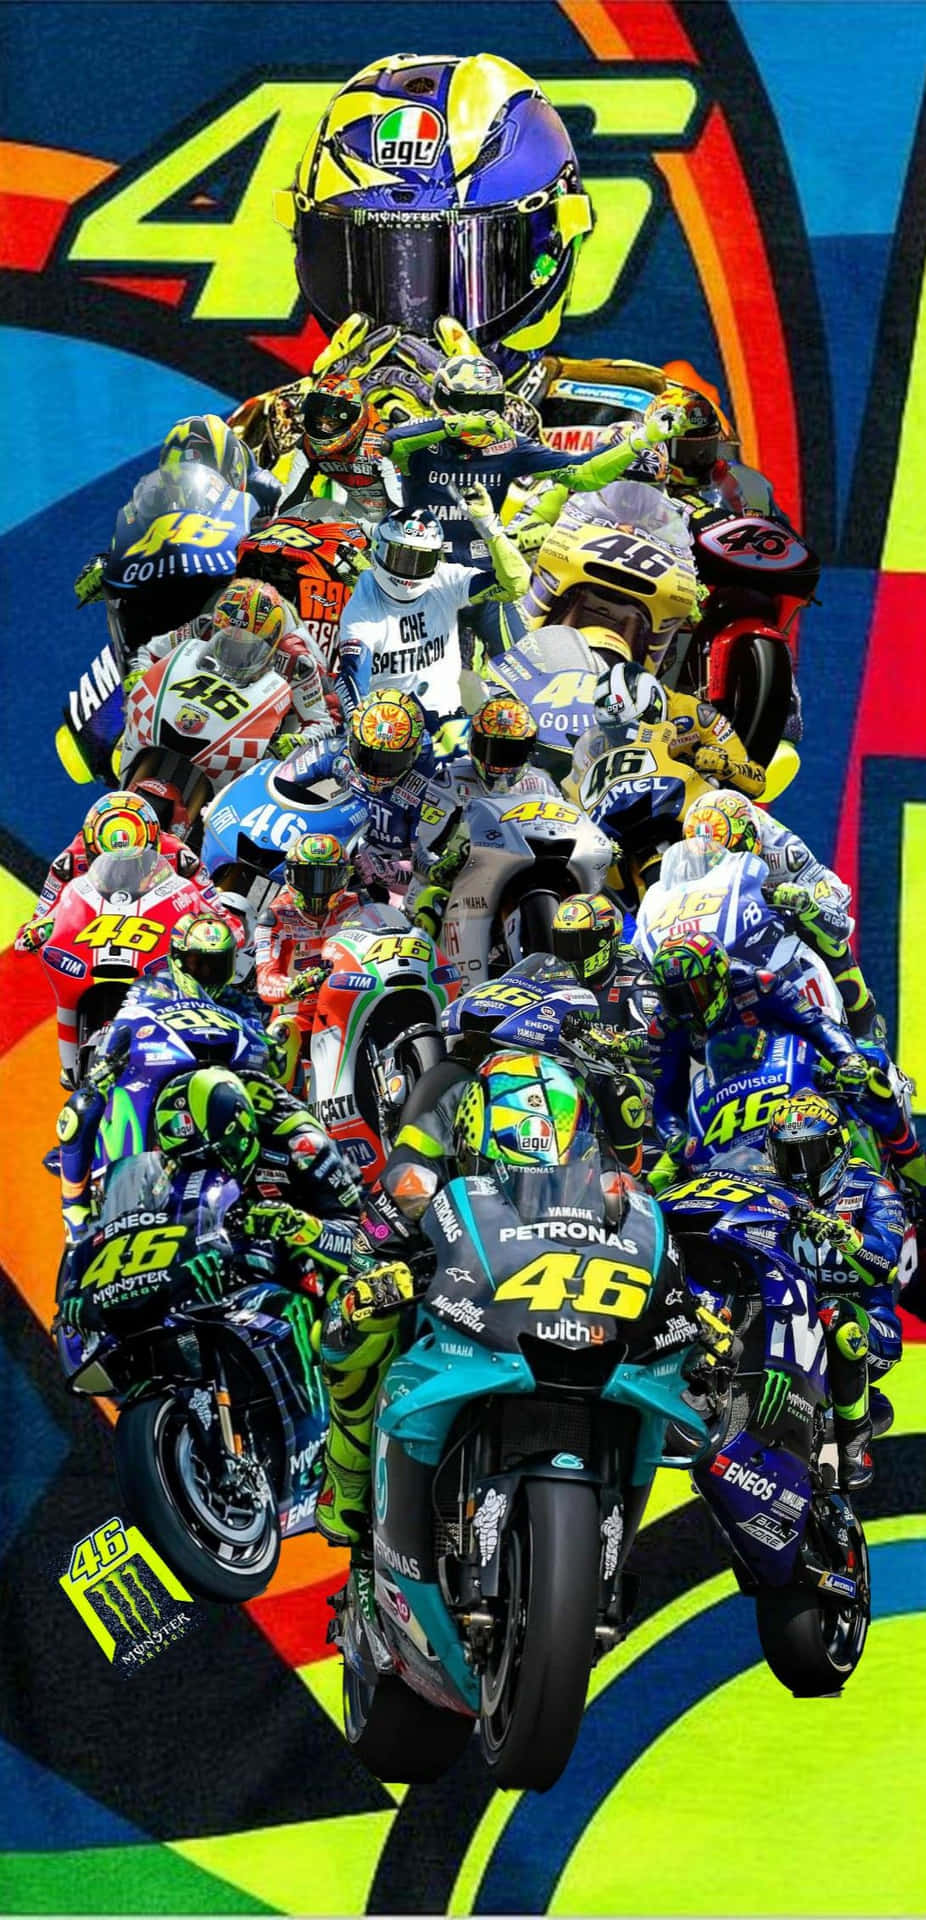 Vr46 Colorful Motorcycle Poster